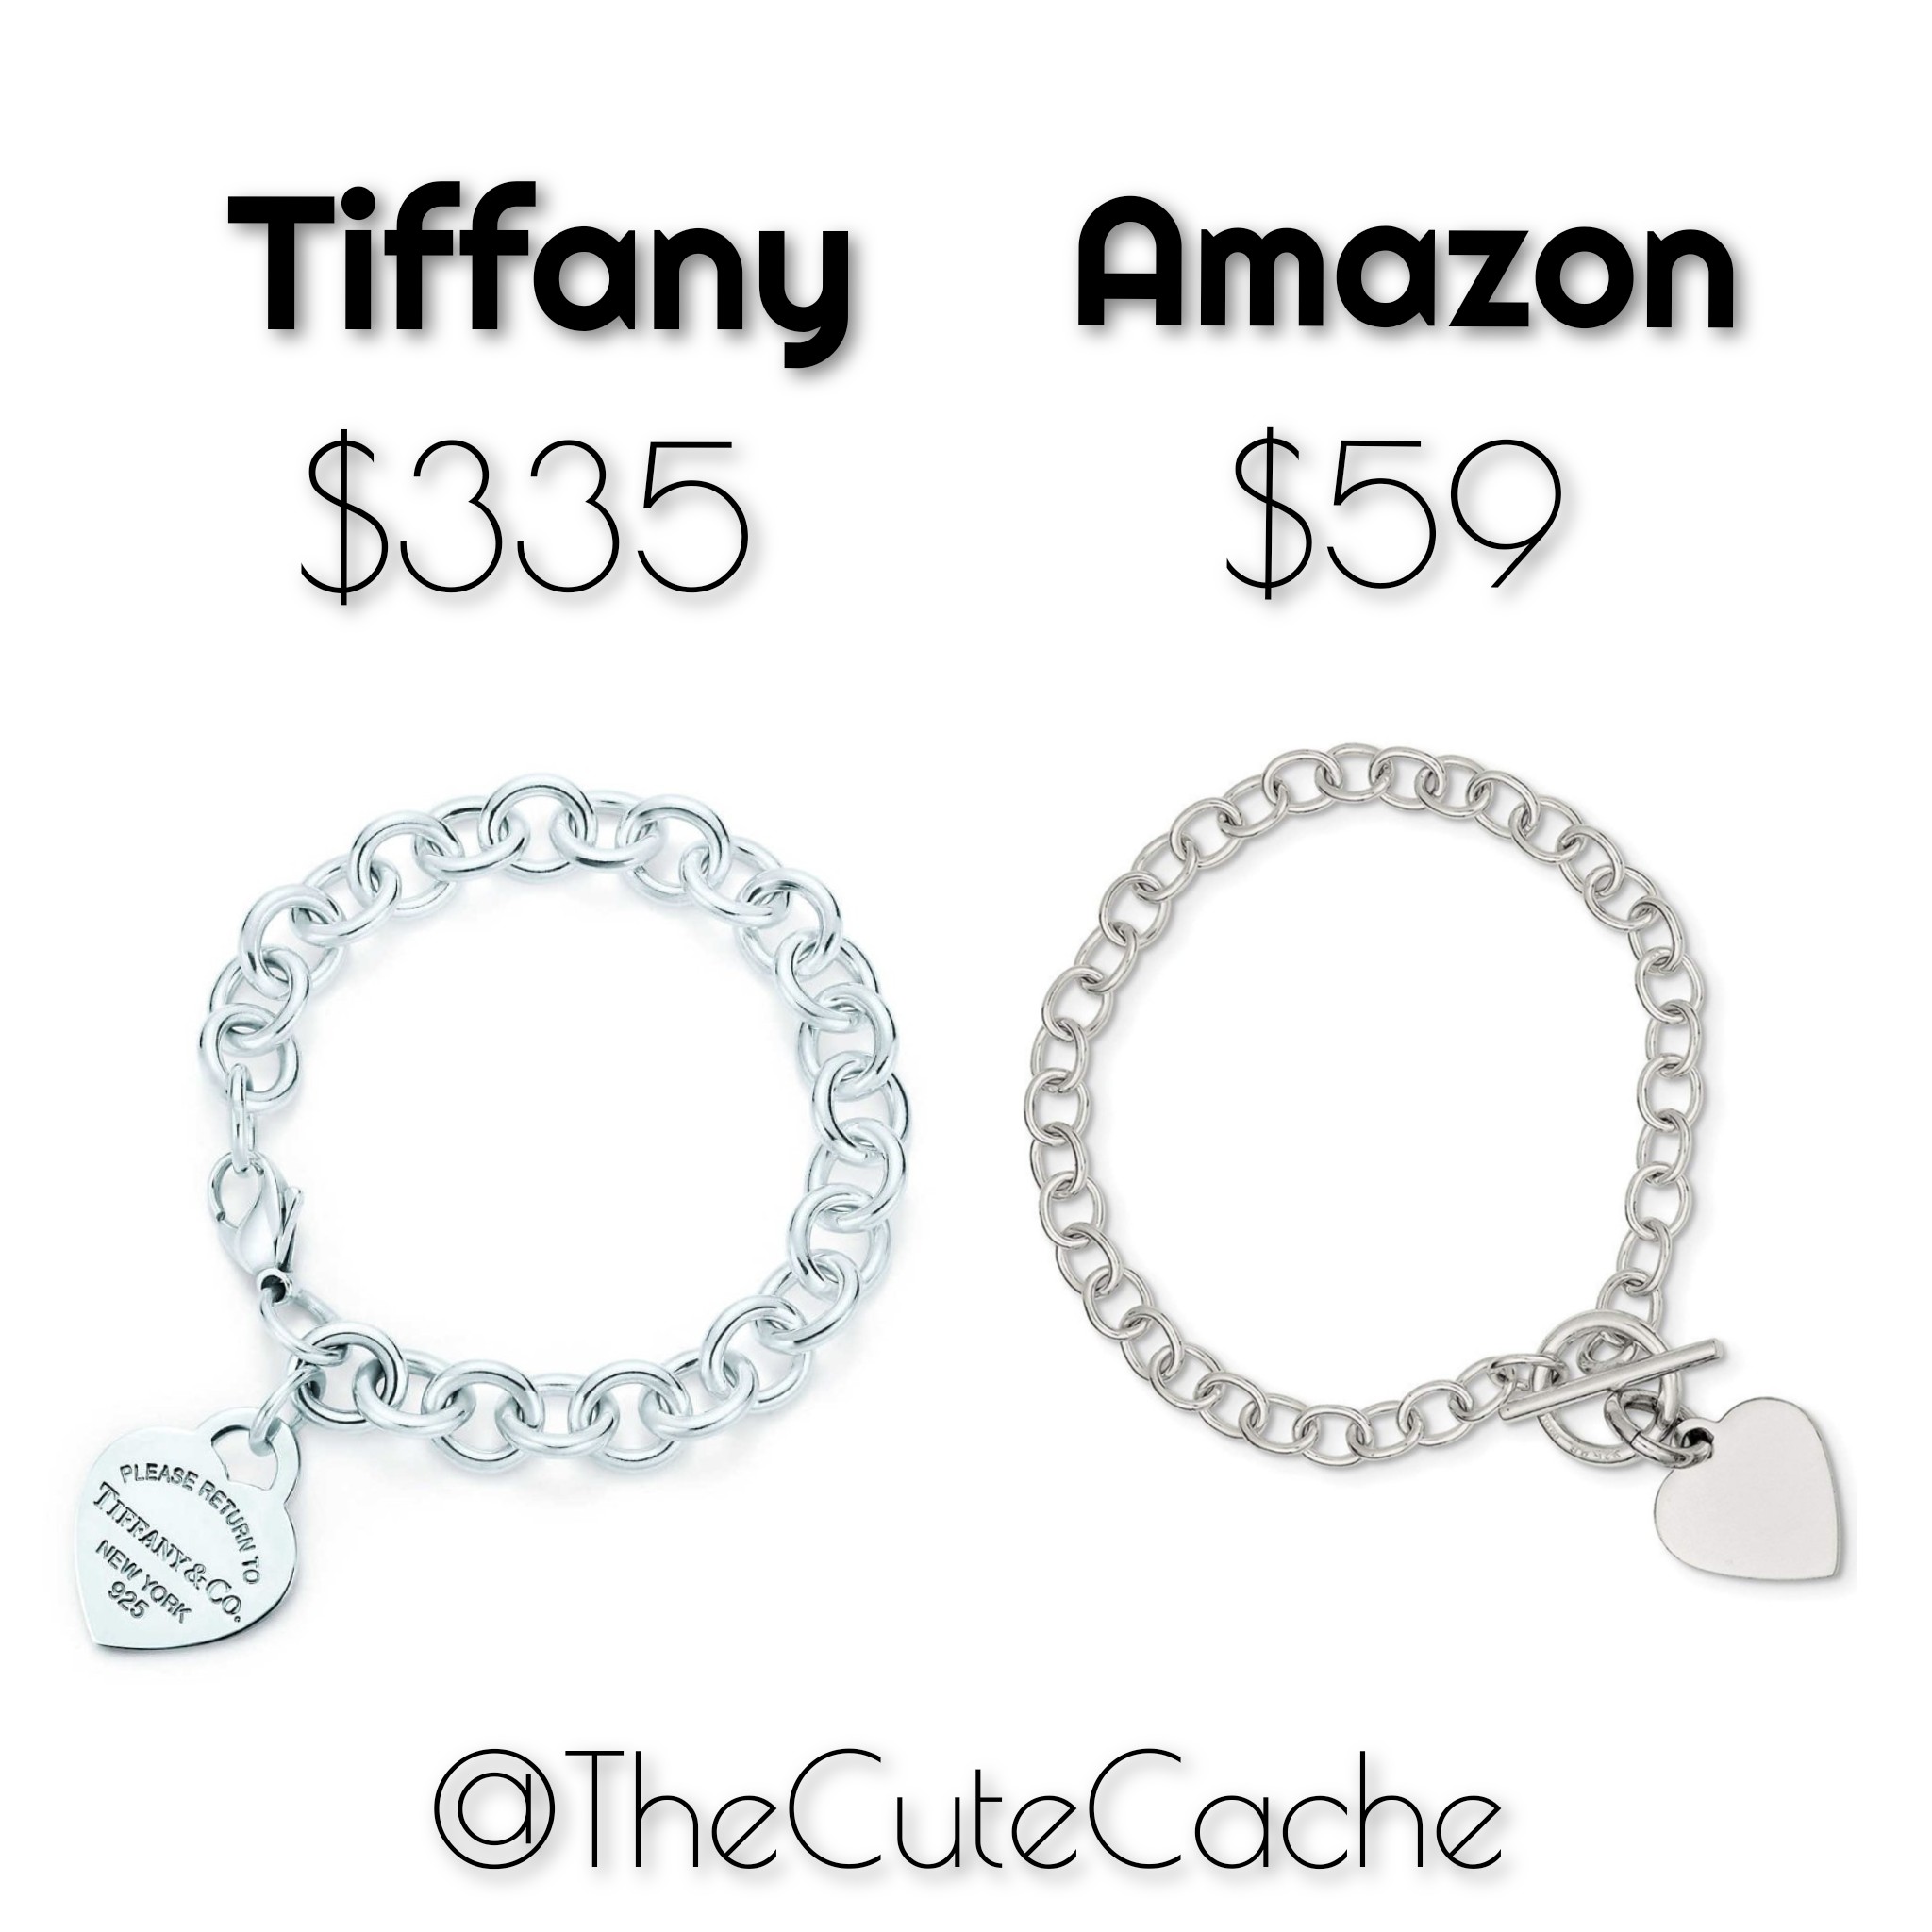 tiffany and co dupes